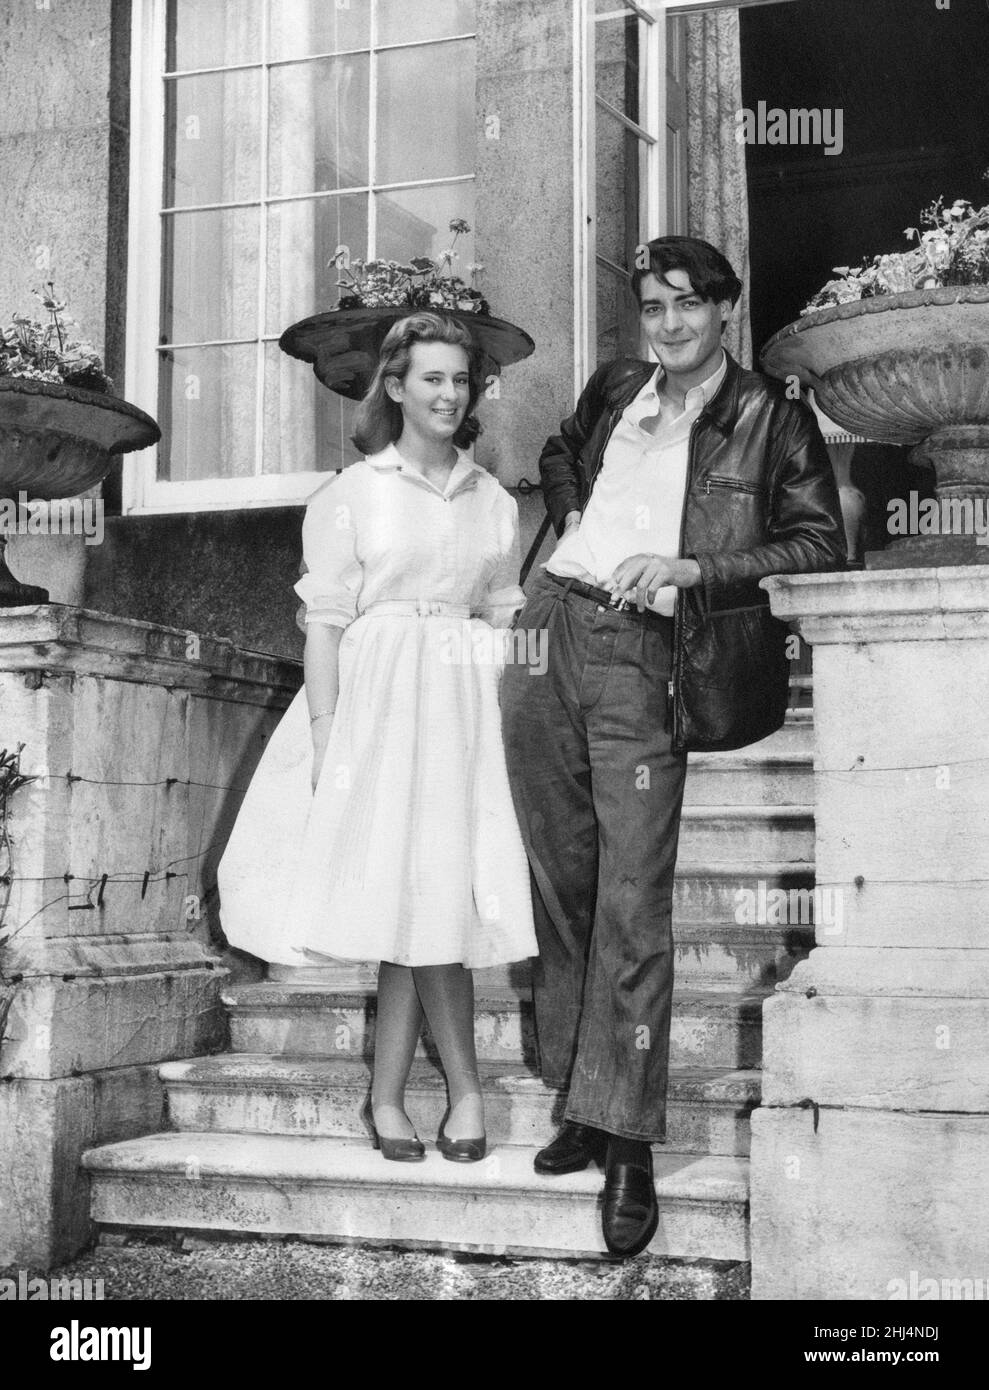 Lord Londonderry, 9th Marquess of Londonderry pictured at Wynyard Hall Estate, County Durham, 12th July 1958. Our Picture Shows ... home for the first time since their wedding five weeks ago, Lord Londonderry aged 20 years old, with his 17 year old bride, the former Miss Nicolette Harrison. Stock Photo